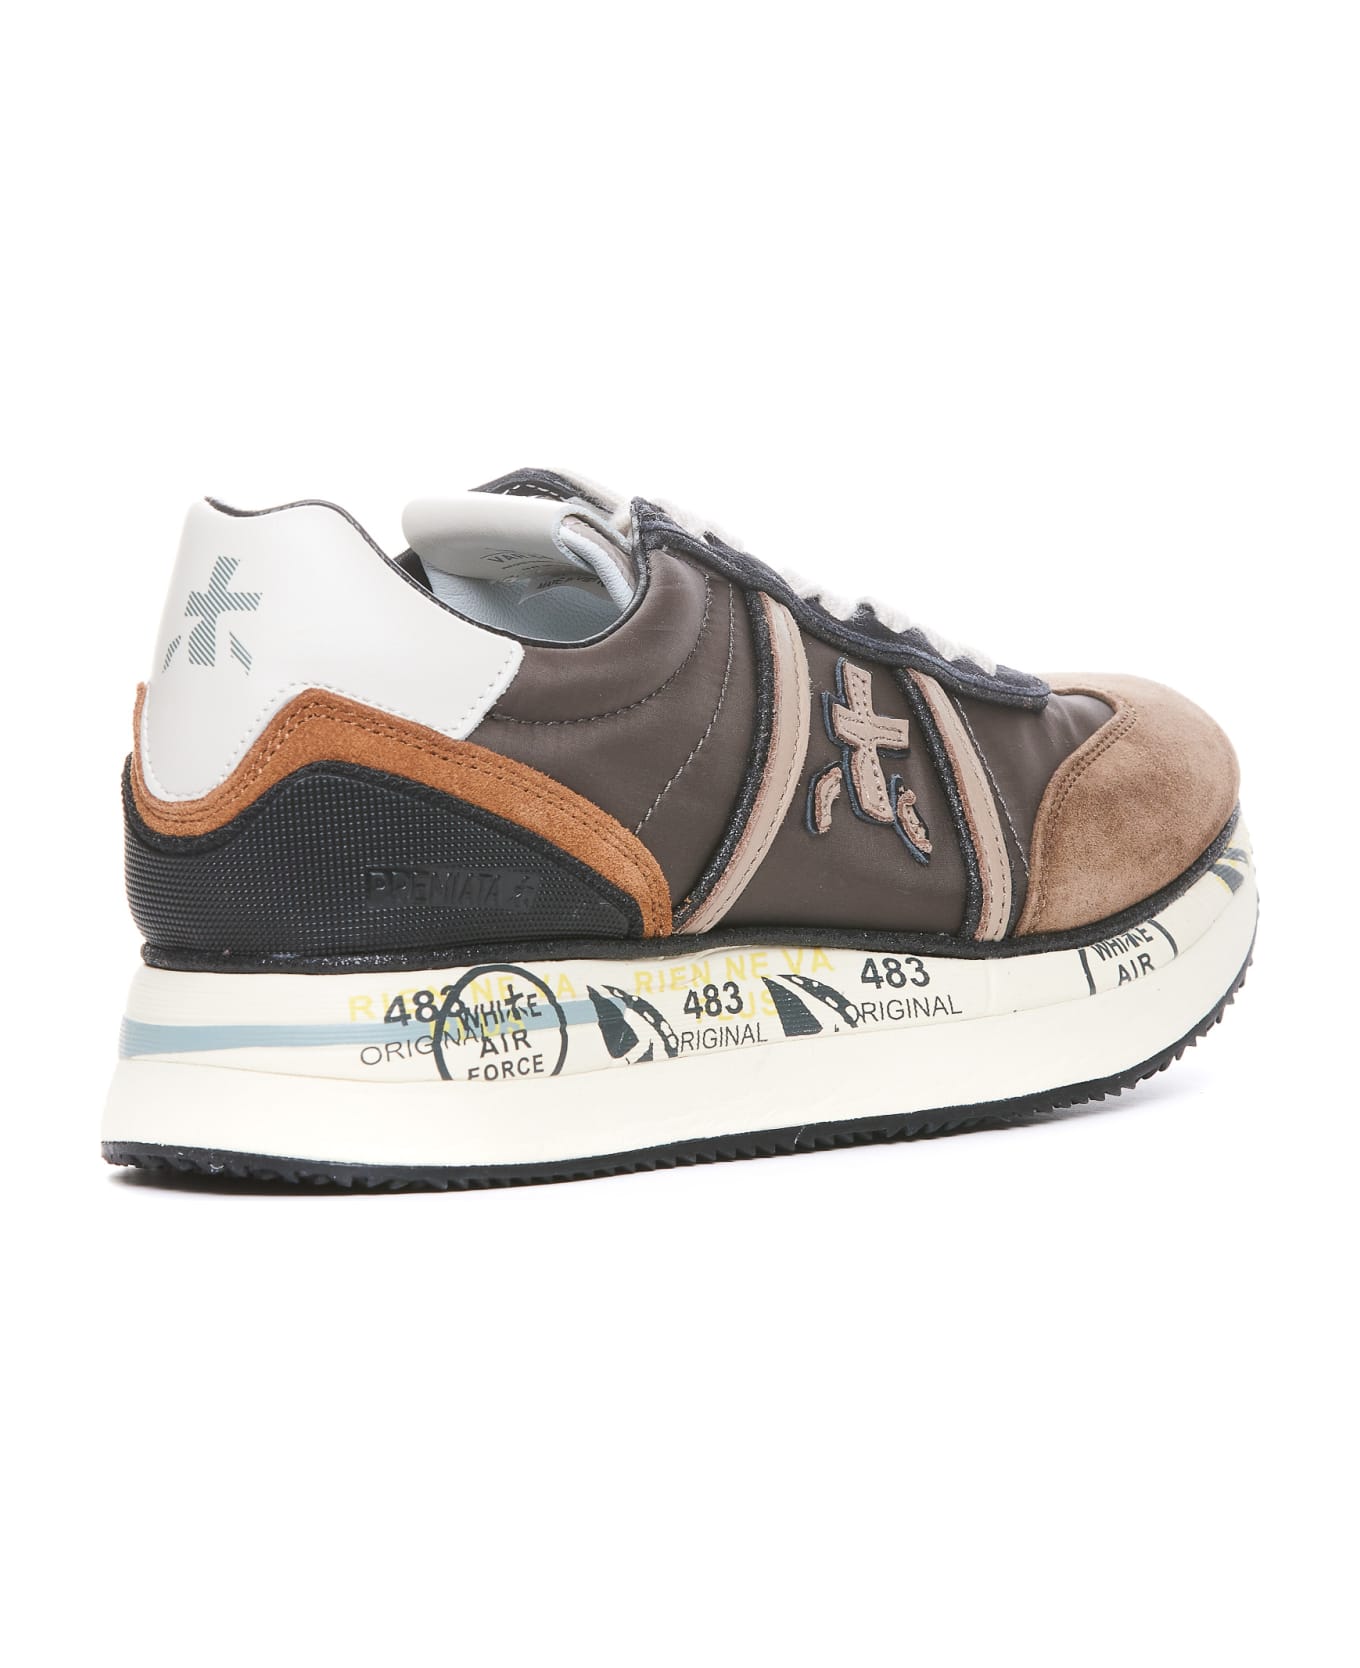 Premiata Conny Sneakers In Brown Suede And Fabric - Grigio